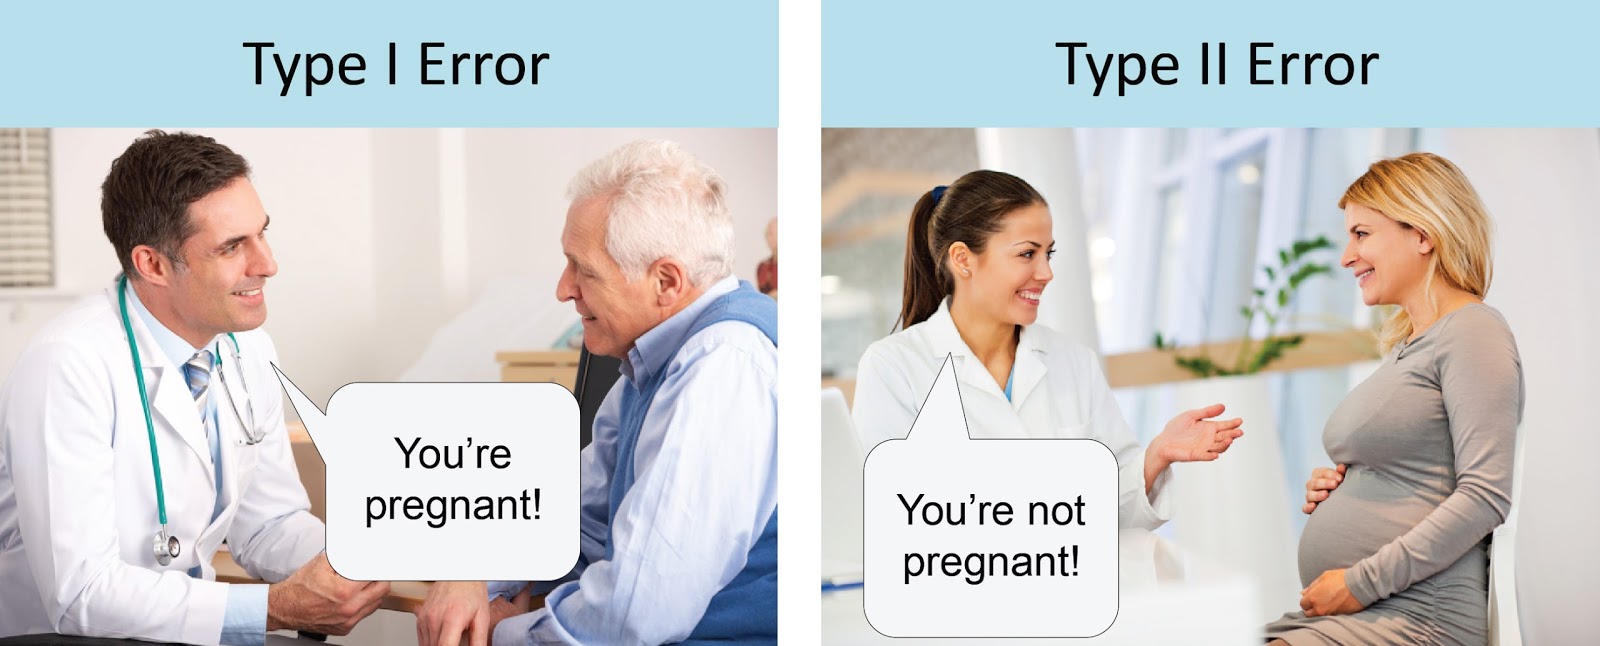 Unbiased Research: Type I and Type II Errors